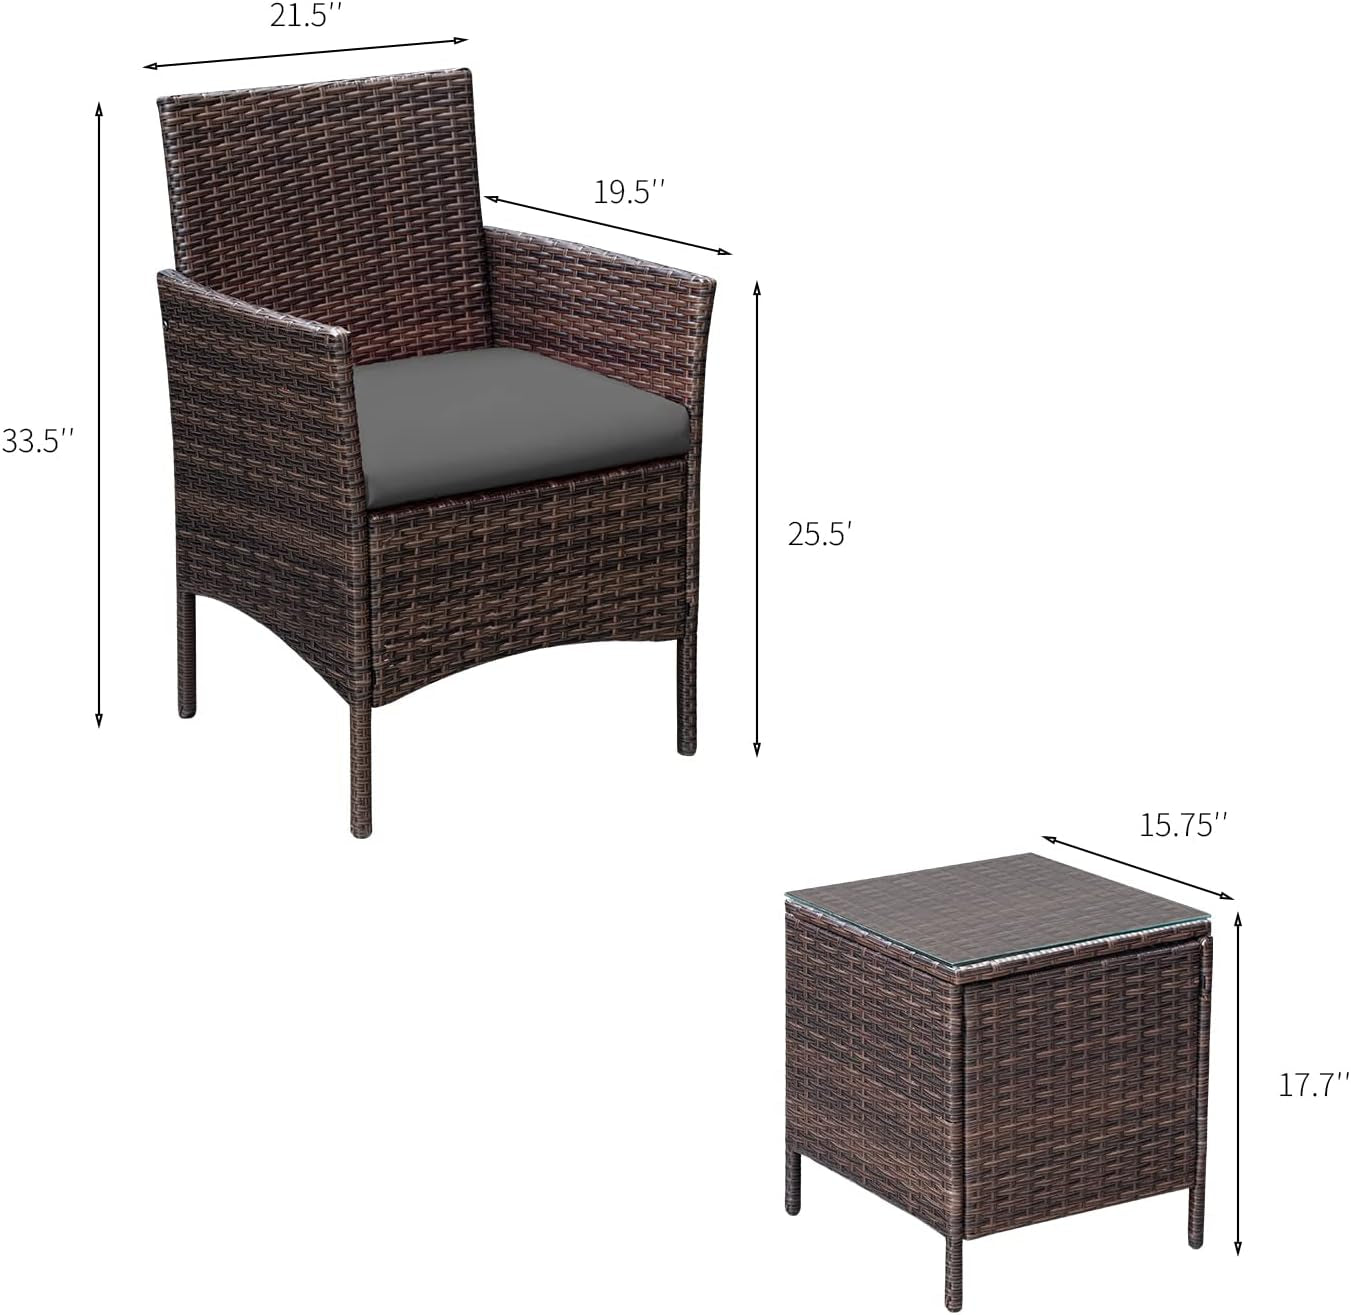 3 Pieces Patio Furniture Sets Outdoor PE Rattan Wicker Chairs with Soft Cushion and Glass Coffee Table for Garden Backyard Porch Poolside, Brown and Gray